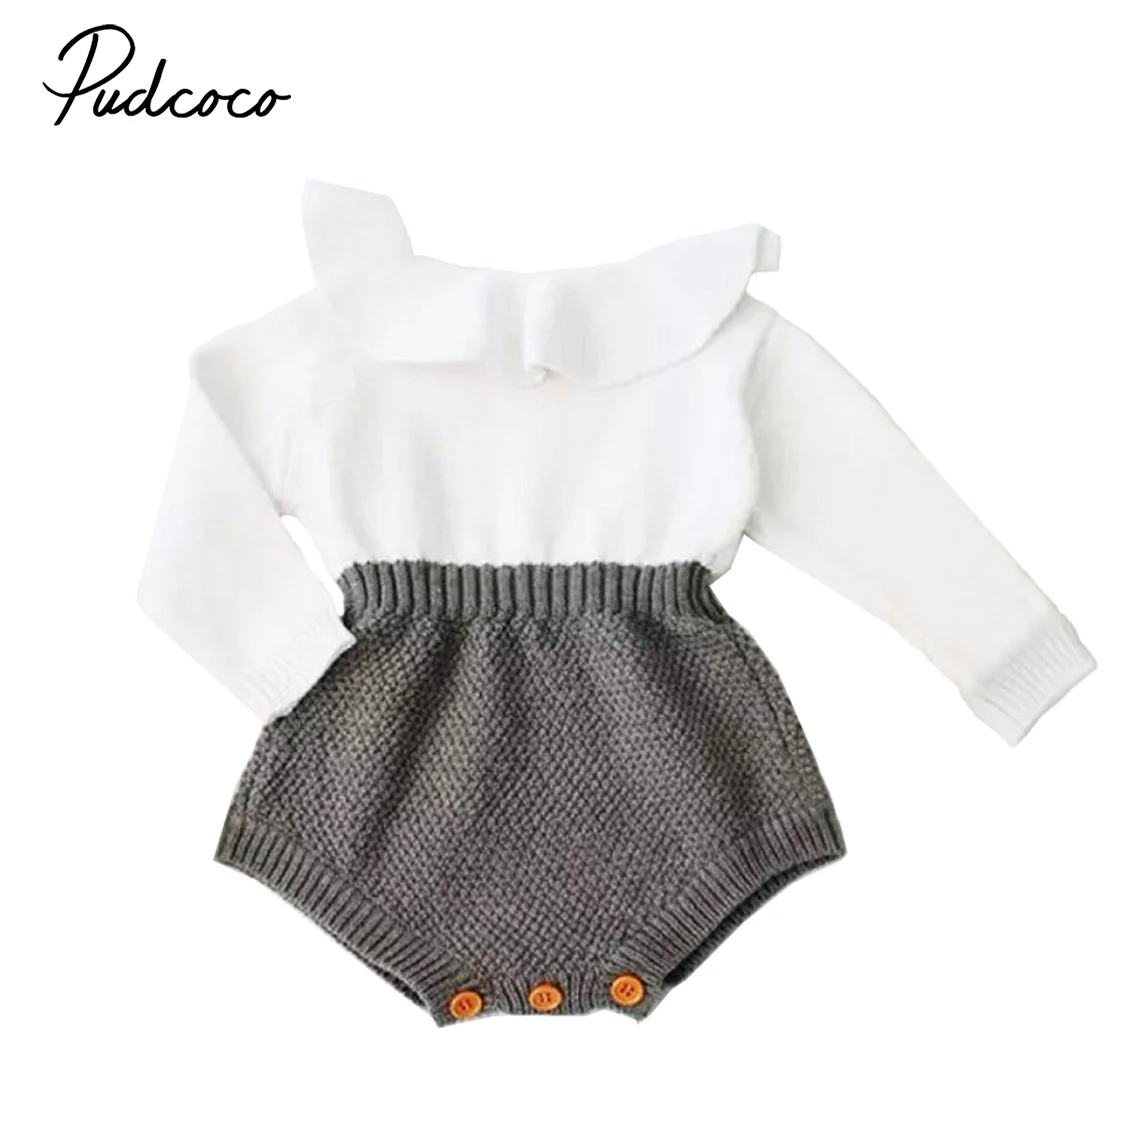 

Pudcoco Newborn Baby Girl Wool Blend Baby Romper Warm Knit Sweater Long Sleeve Rompers Fall Autumn